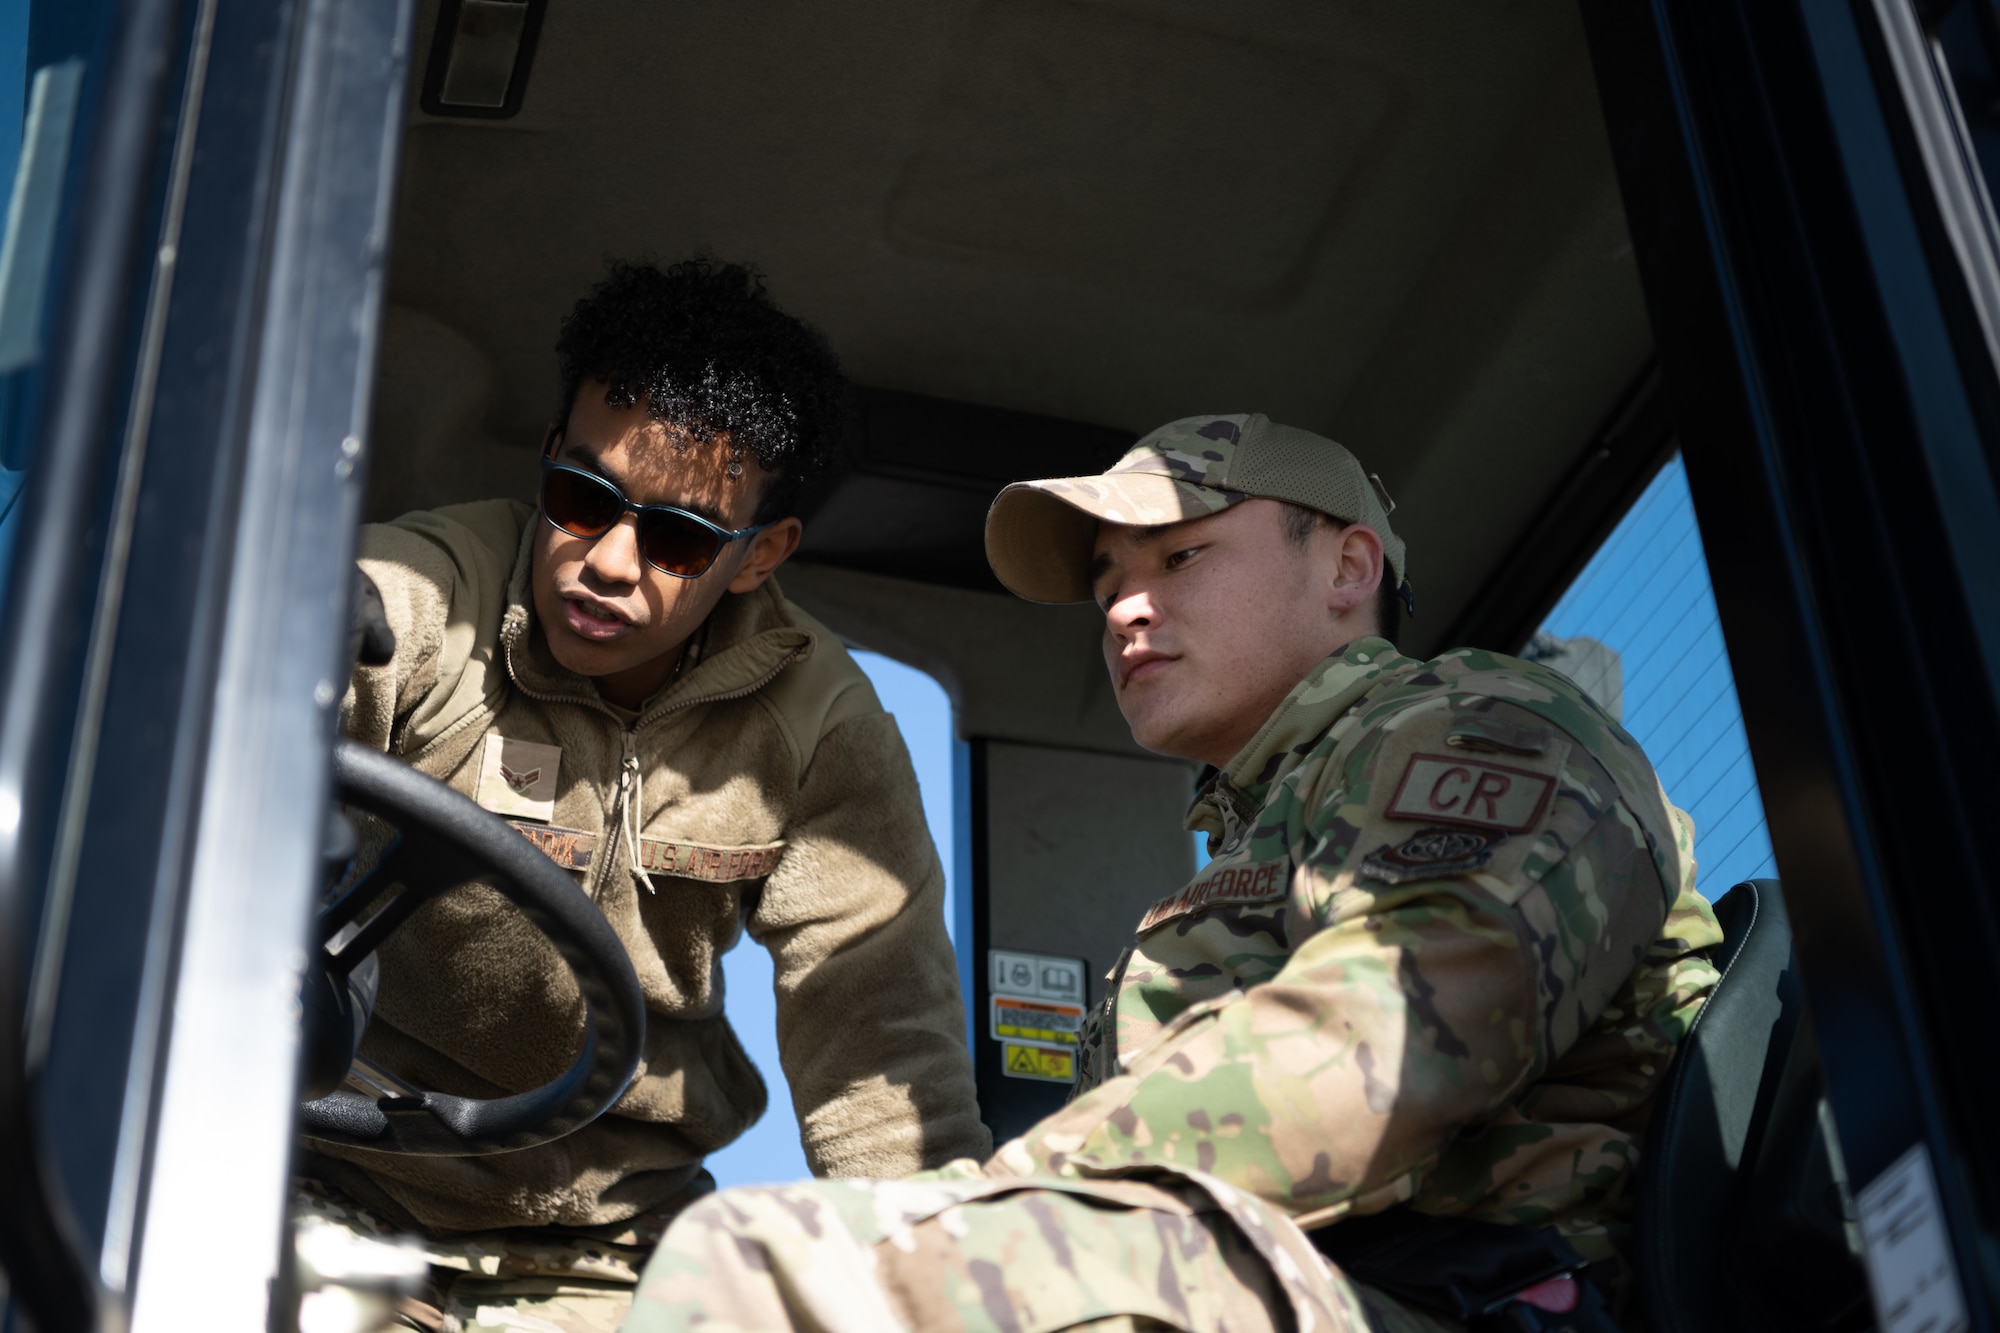 Photos of MCA training - is focused on enhancing Airmen’s proficiencies, learning and performing duties that are outside their daily job responsibilities, making them ready and adaptable to different work environments